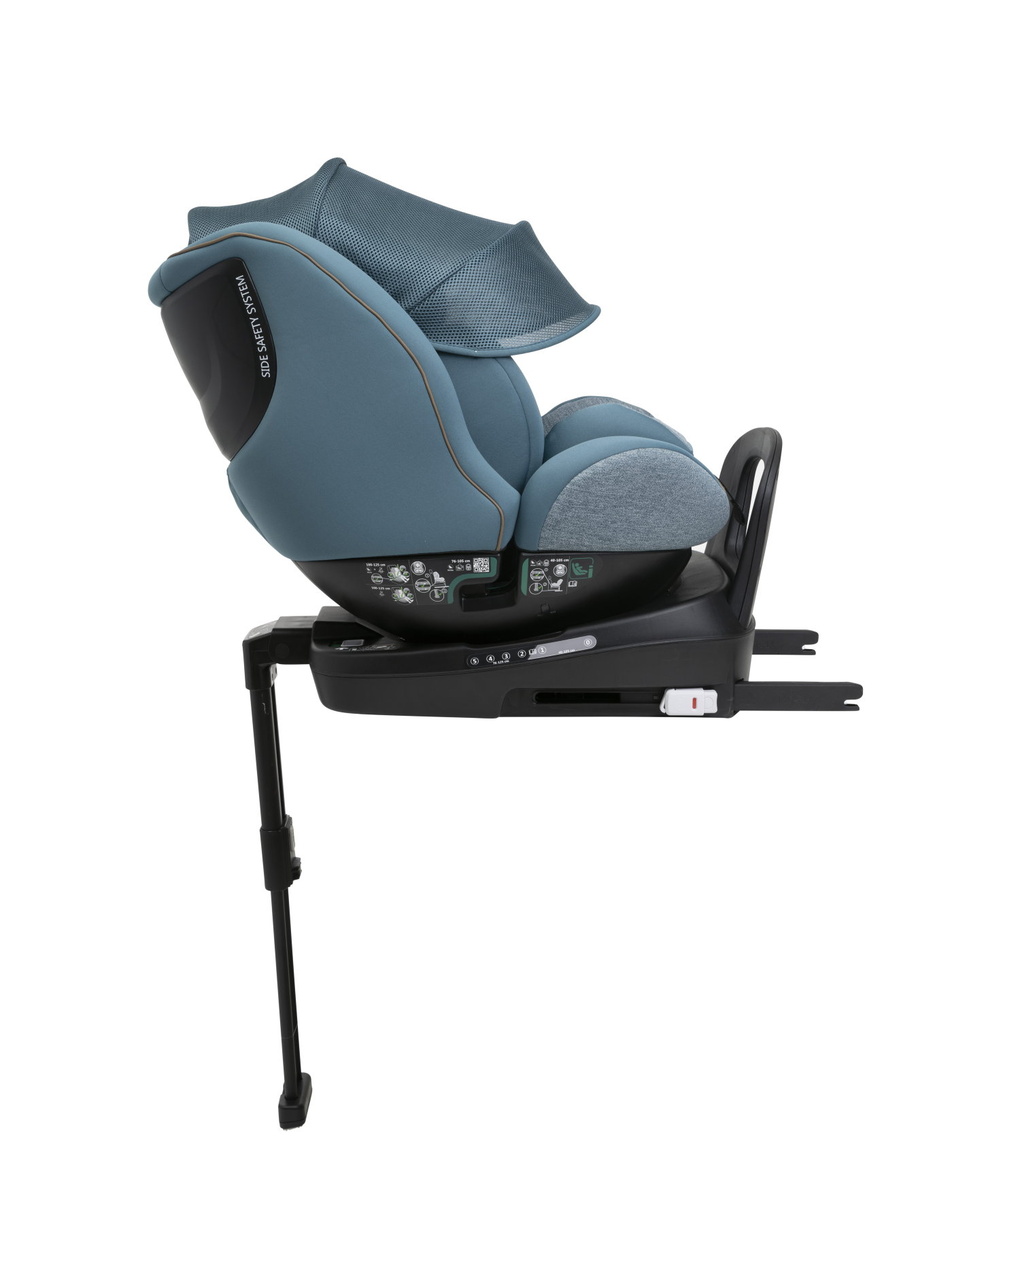 Chicco seat3fit i-size air (40-125 cm) teal melange - chicco - Chicco